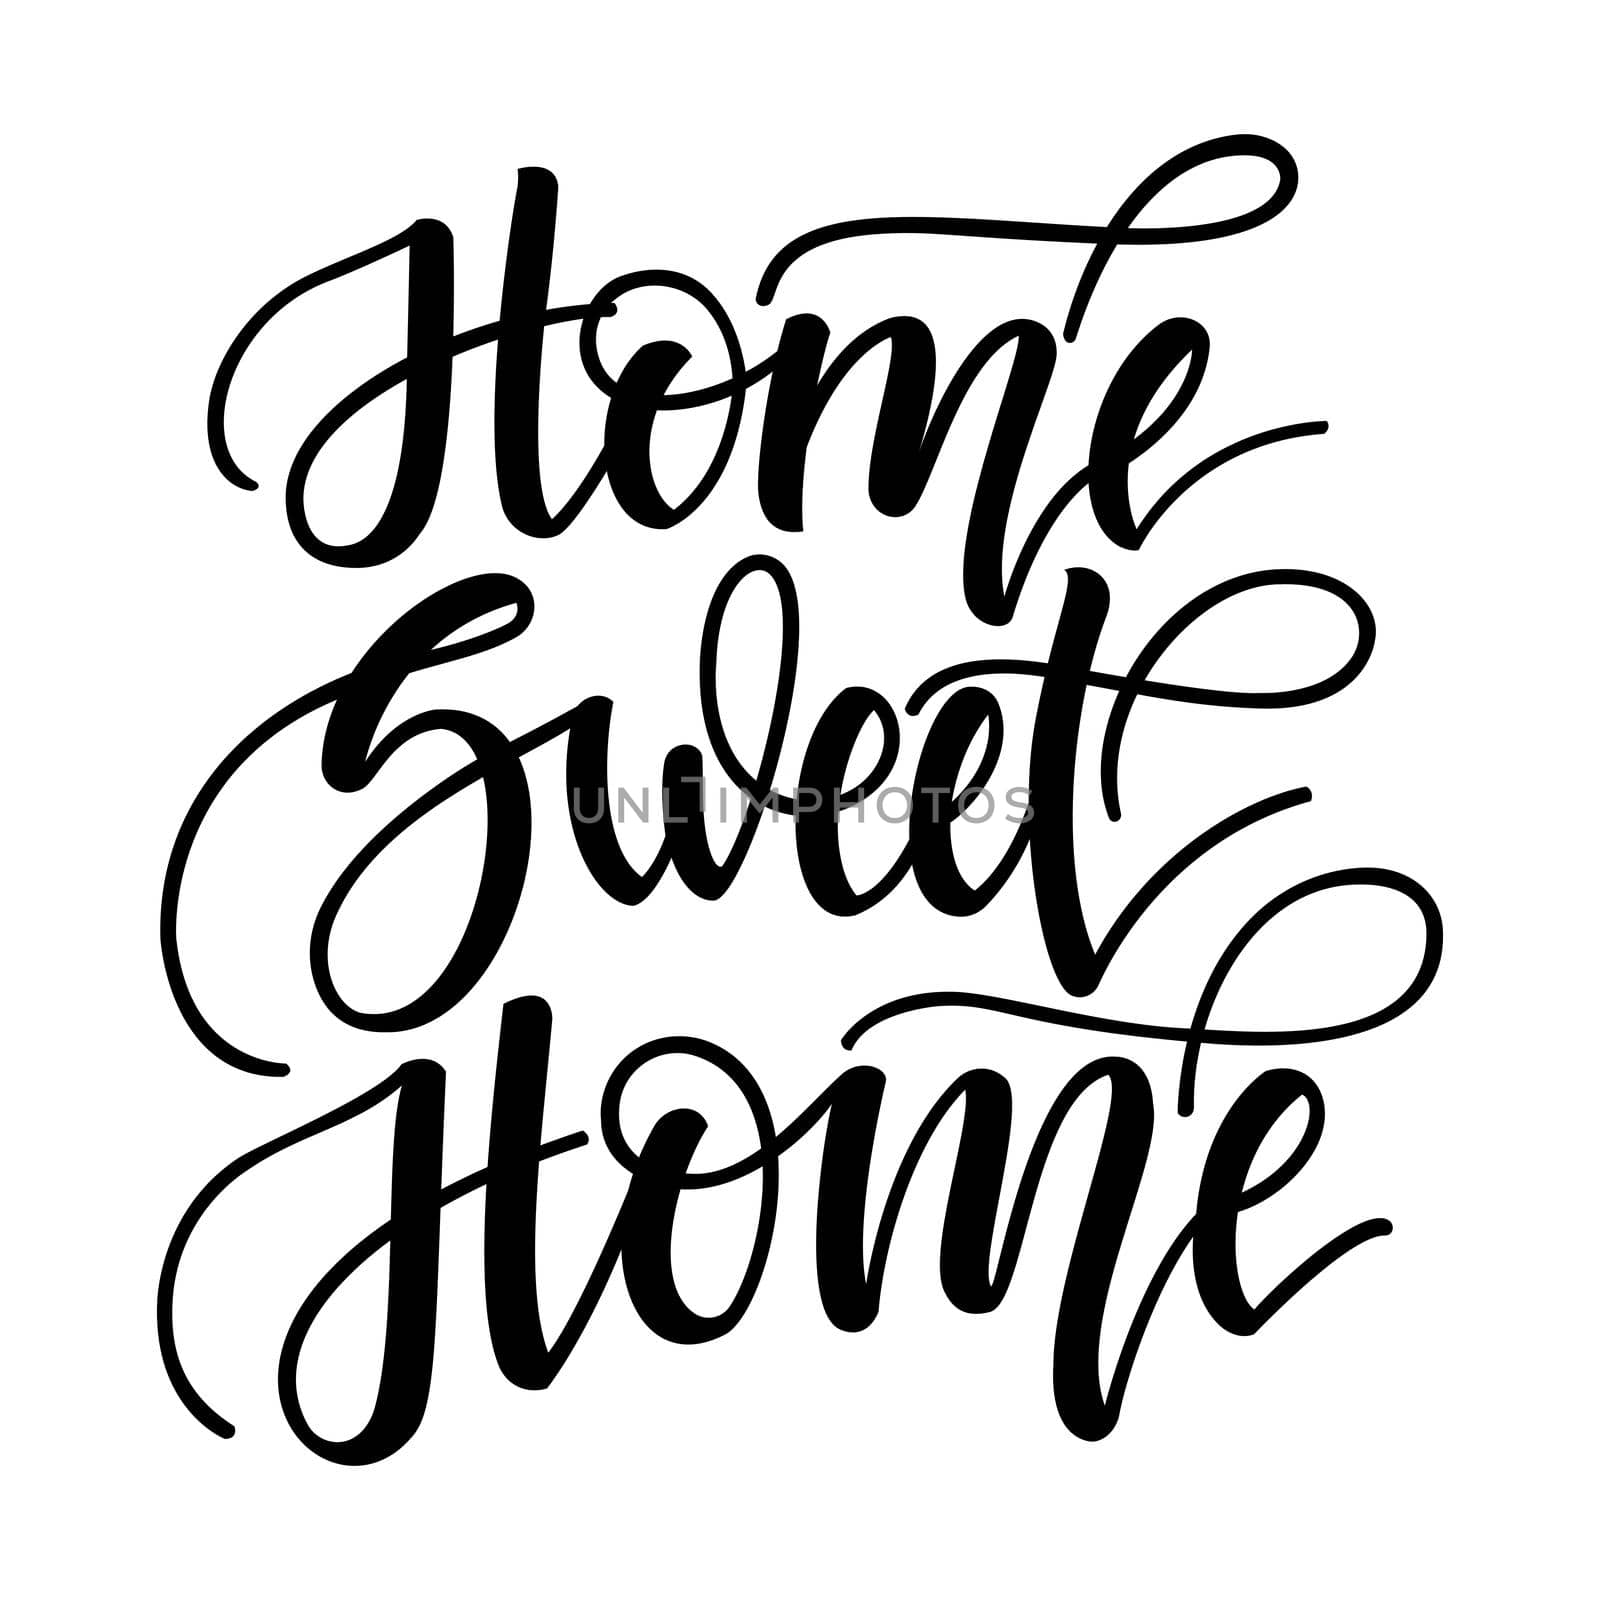 Home sweet home. Inspirational lettering isolated on white background. Positive quote. illustration for cards, posters and much more.